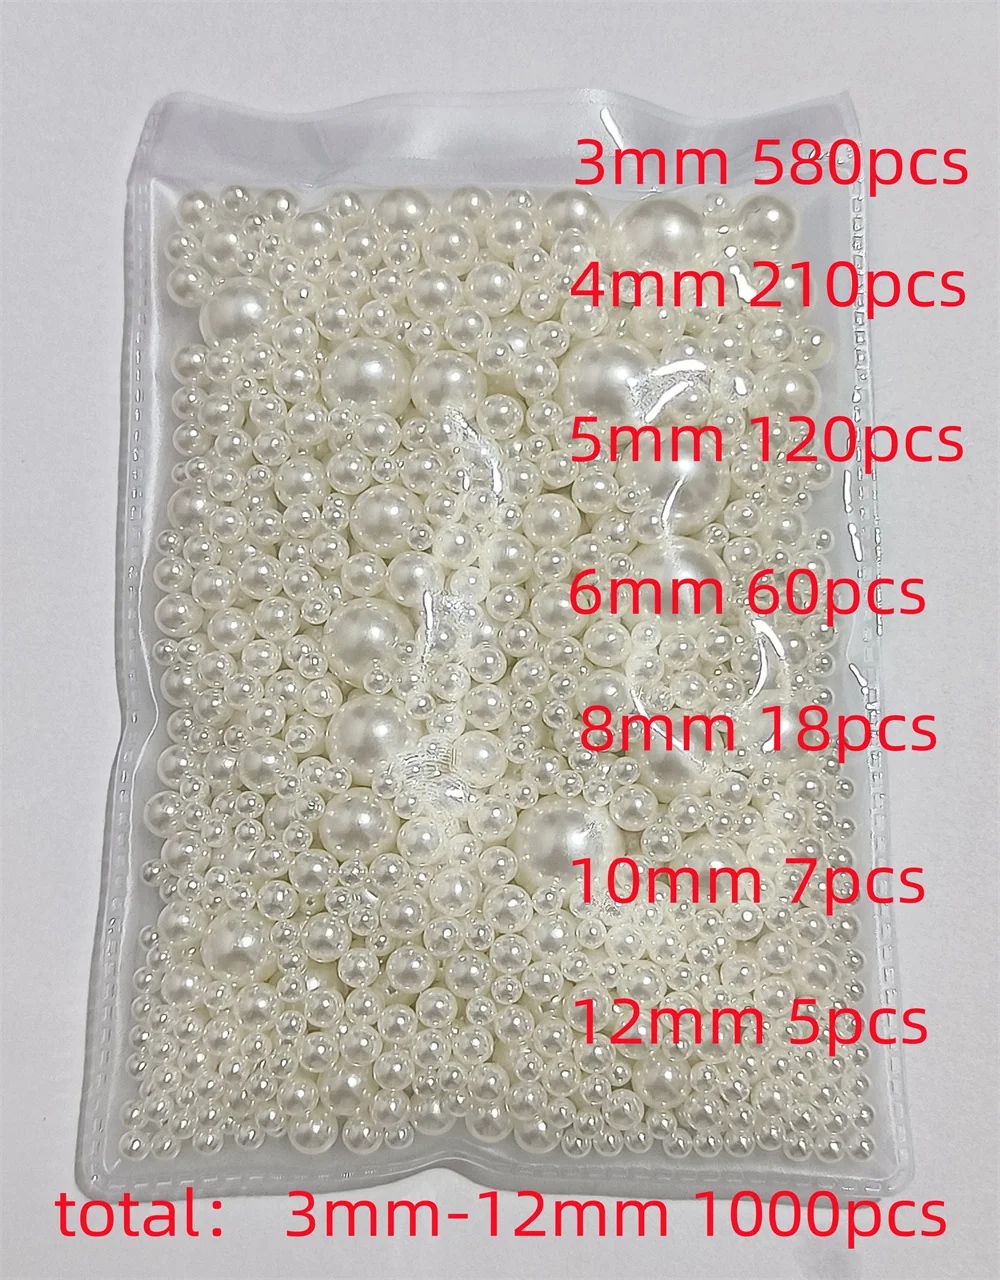 

3-12mm mixed size 1000pcs Pearl white/ABS No hole round imitation plastic pearls for needlework and jewelry making